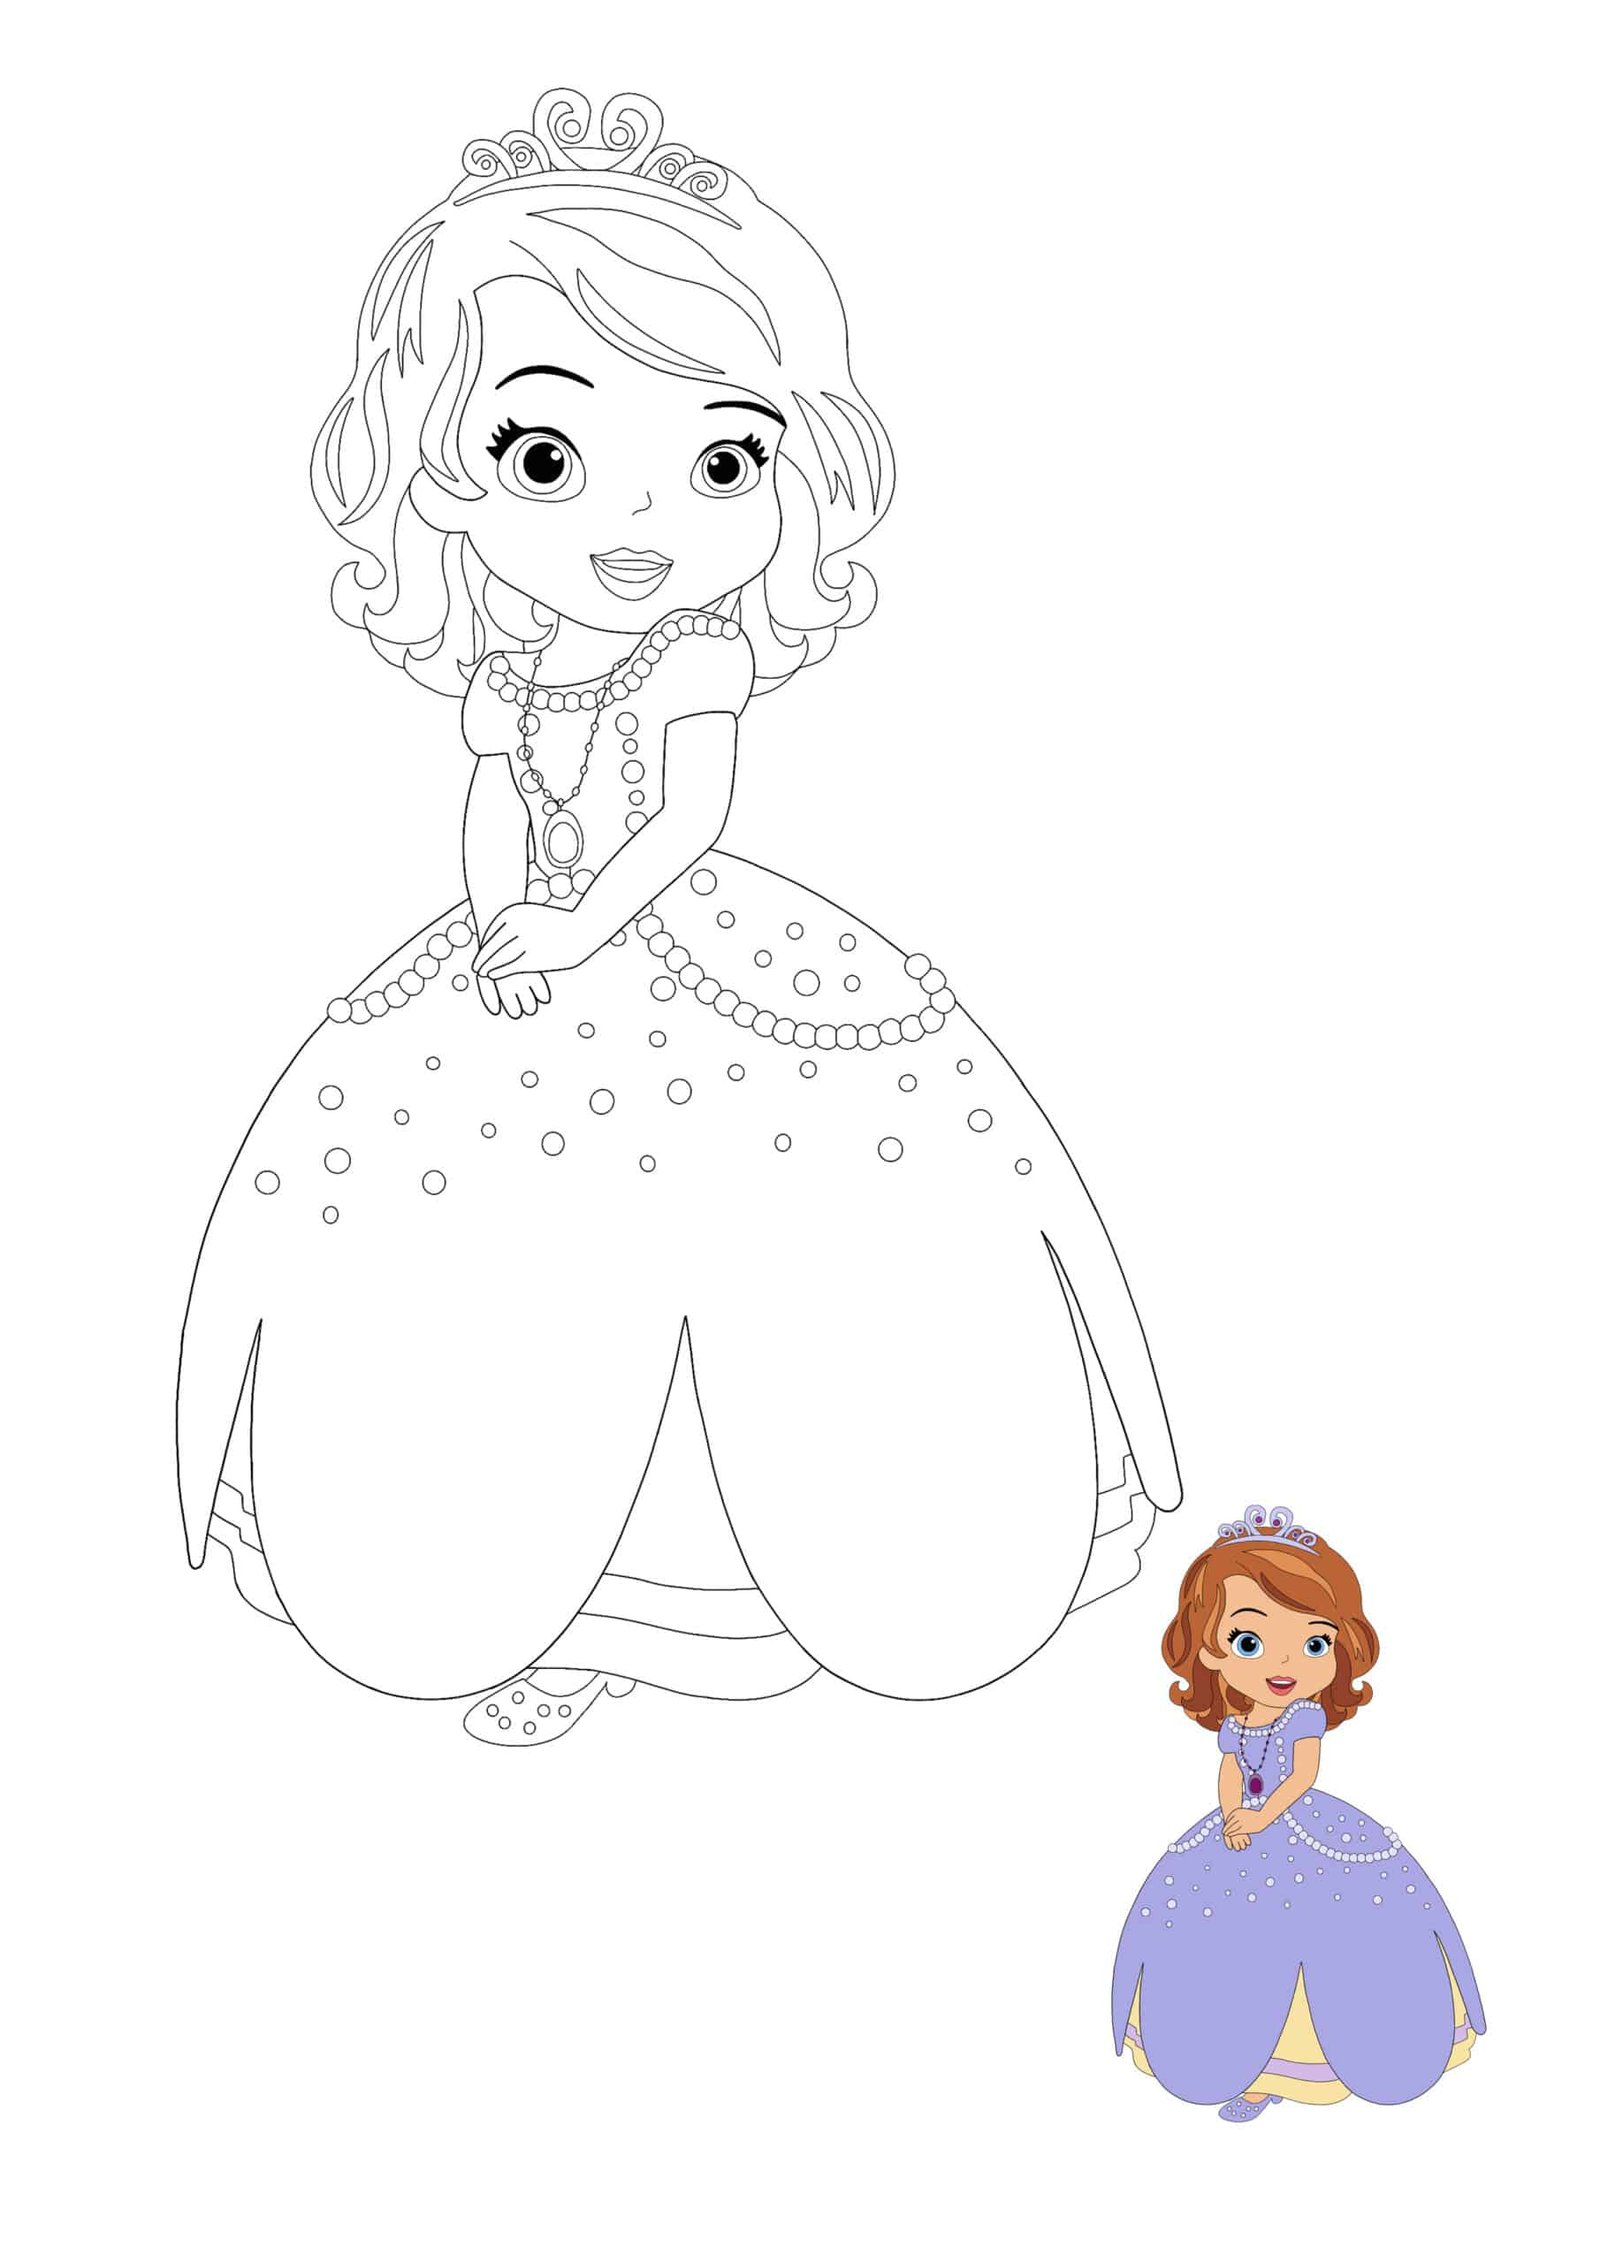 Disney Princess Sofia coloring page with preview